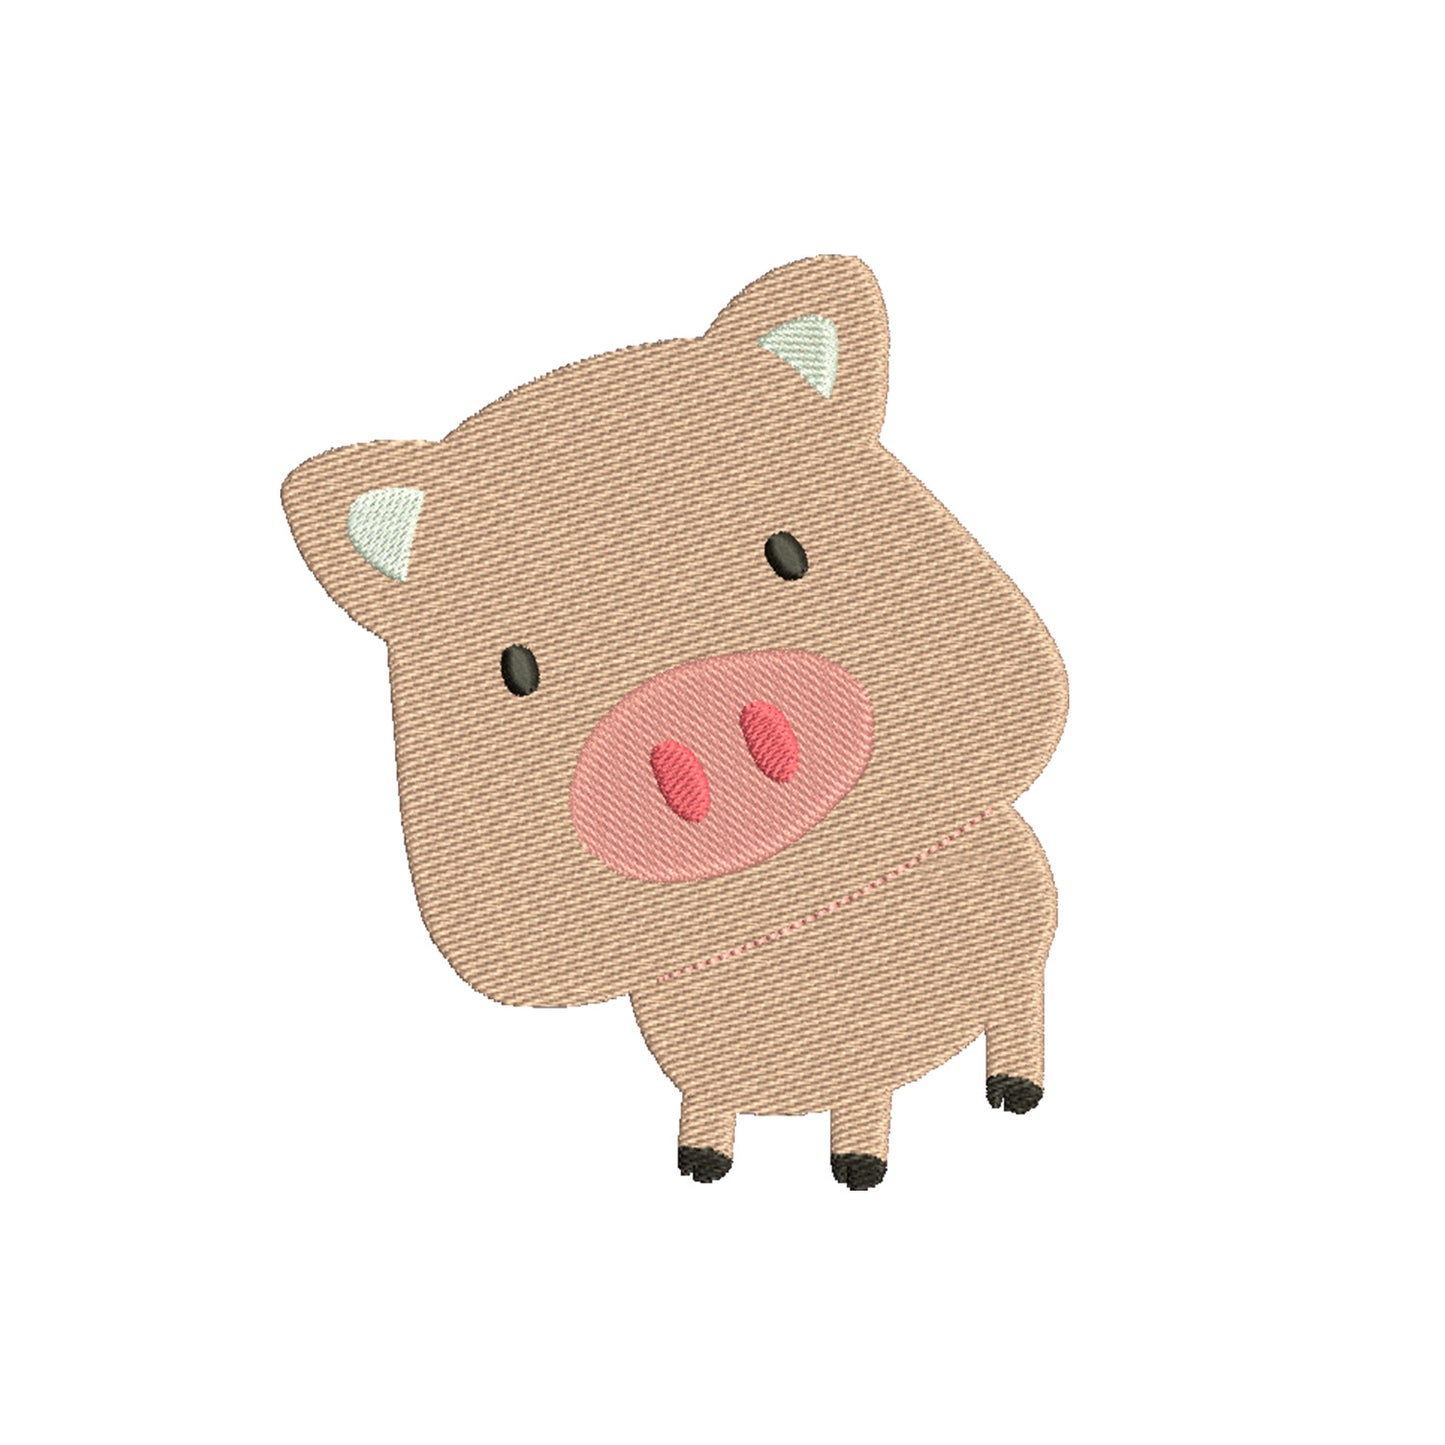 Pig machine embroidery designs - 170101